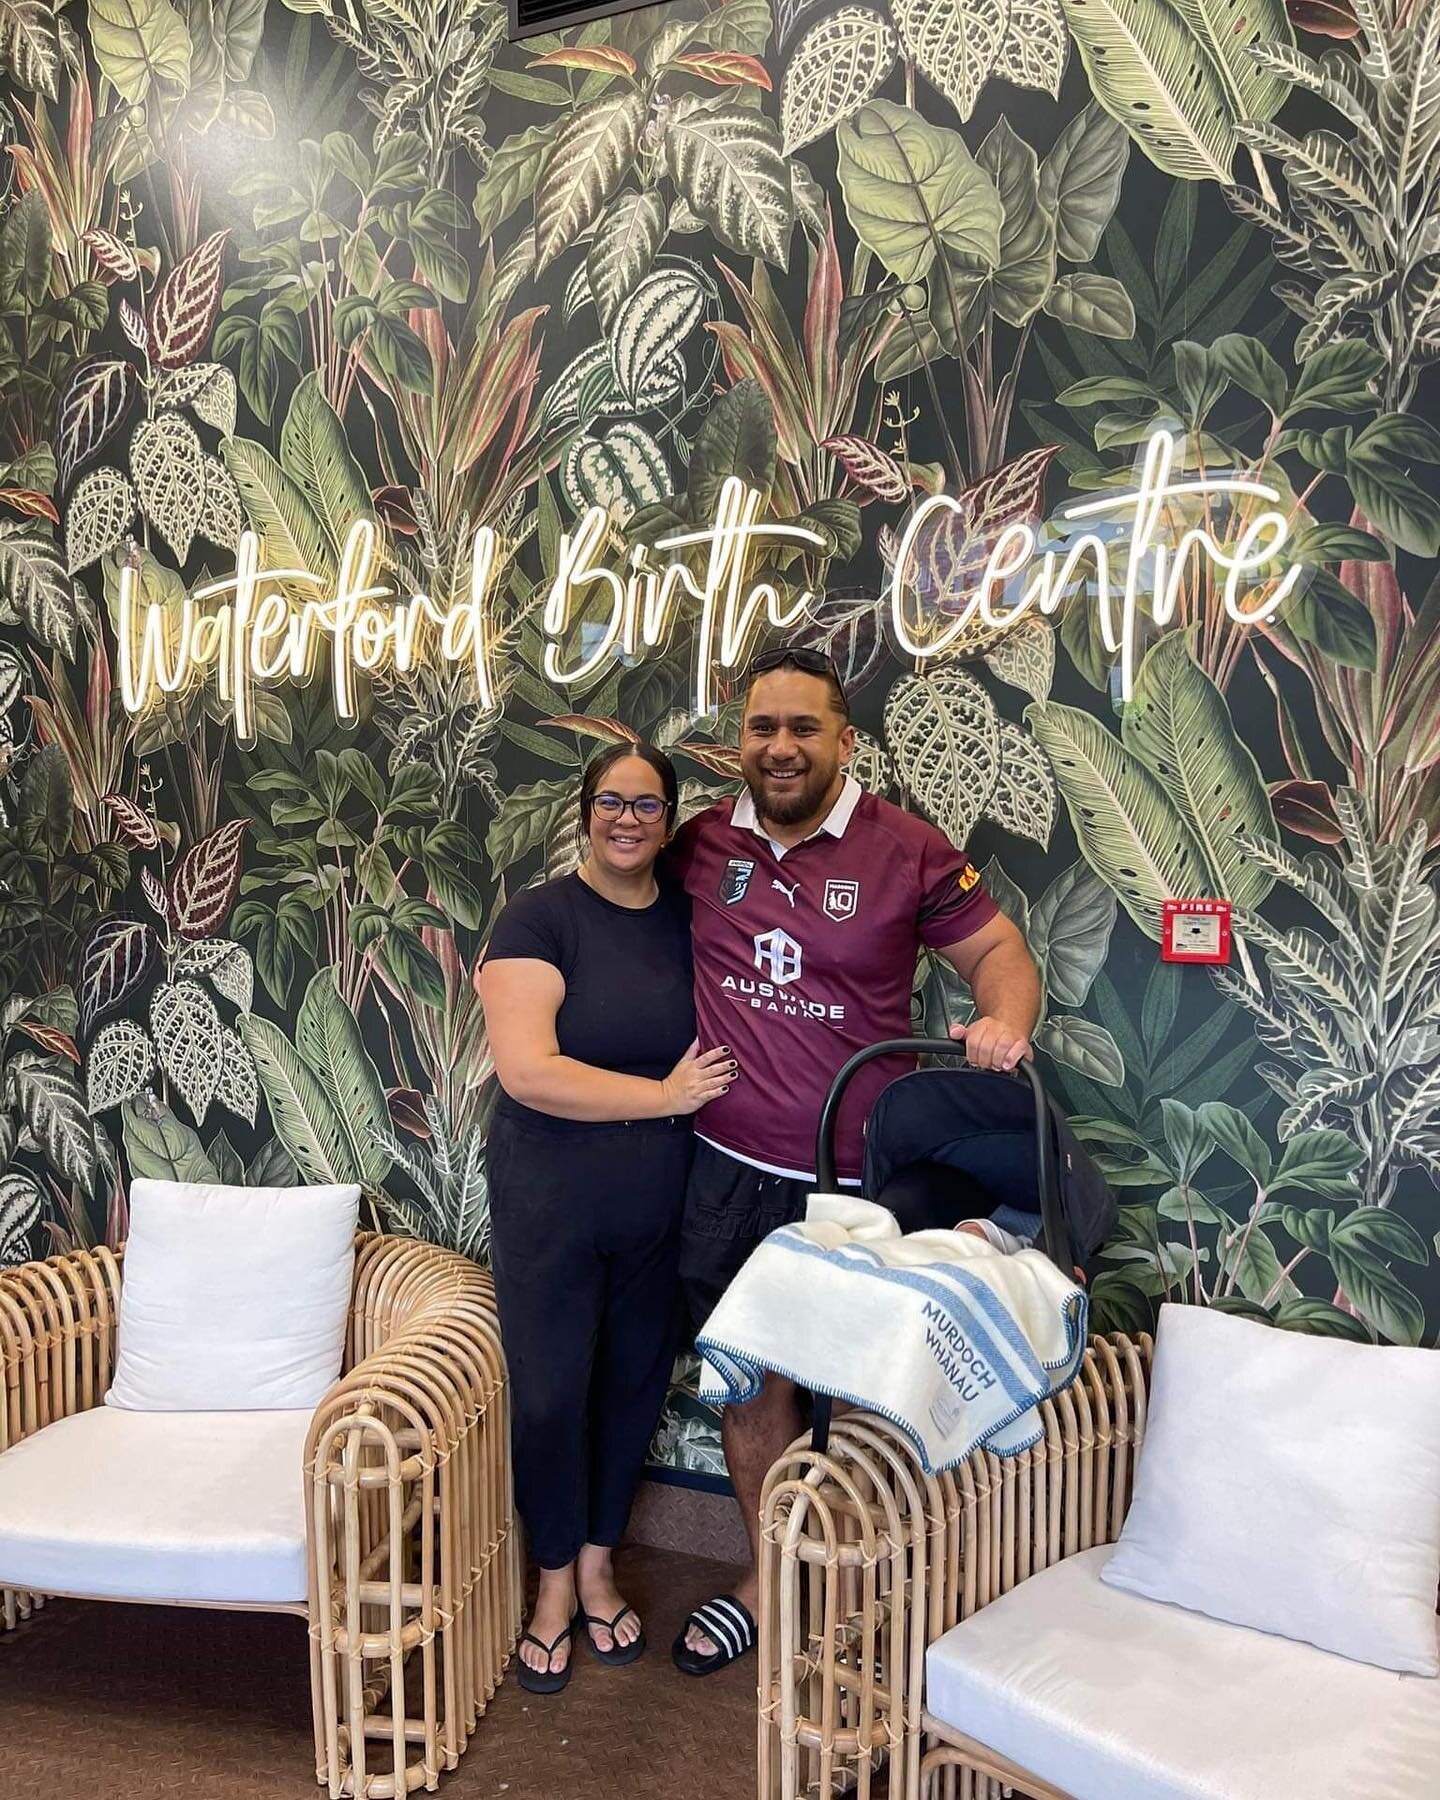 Look at this gorgeous whanau Rauwina Murdoch and Kurtis and their baby Taurikura. Congratulations to all your whanau from the team at Waterford we loved having you 🥰